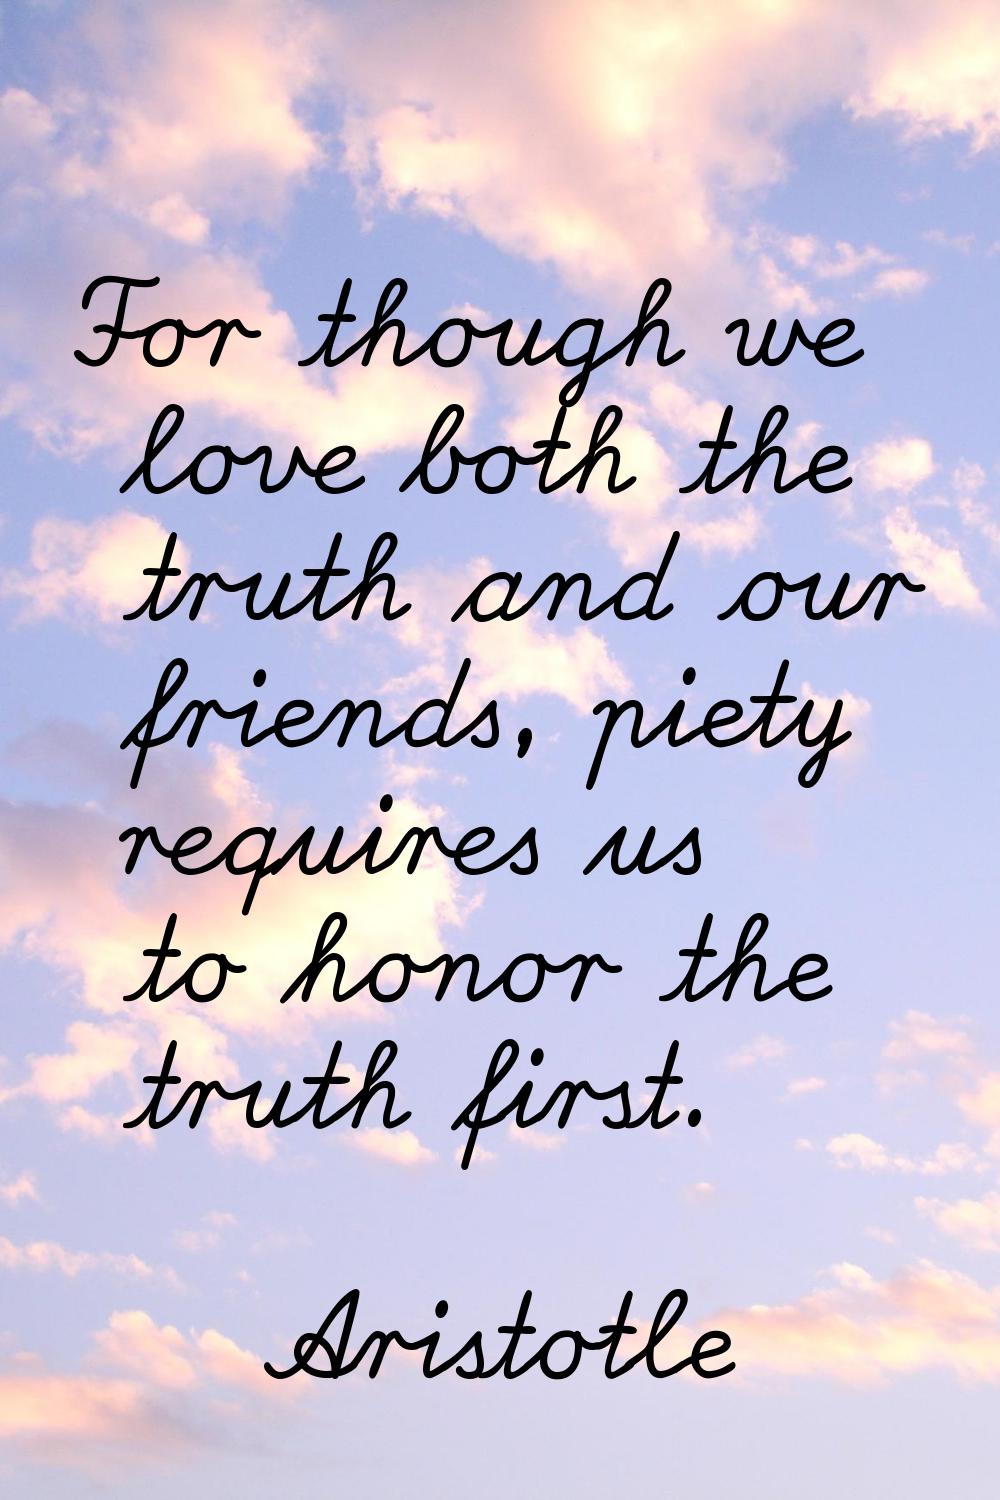 For though we love both the truth and our friends, piety requires us to honor the truth first.